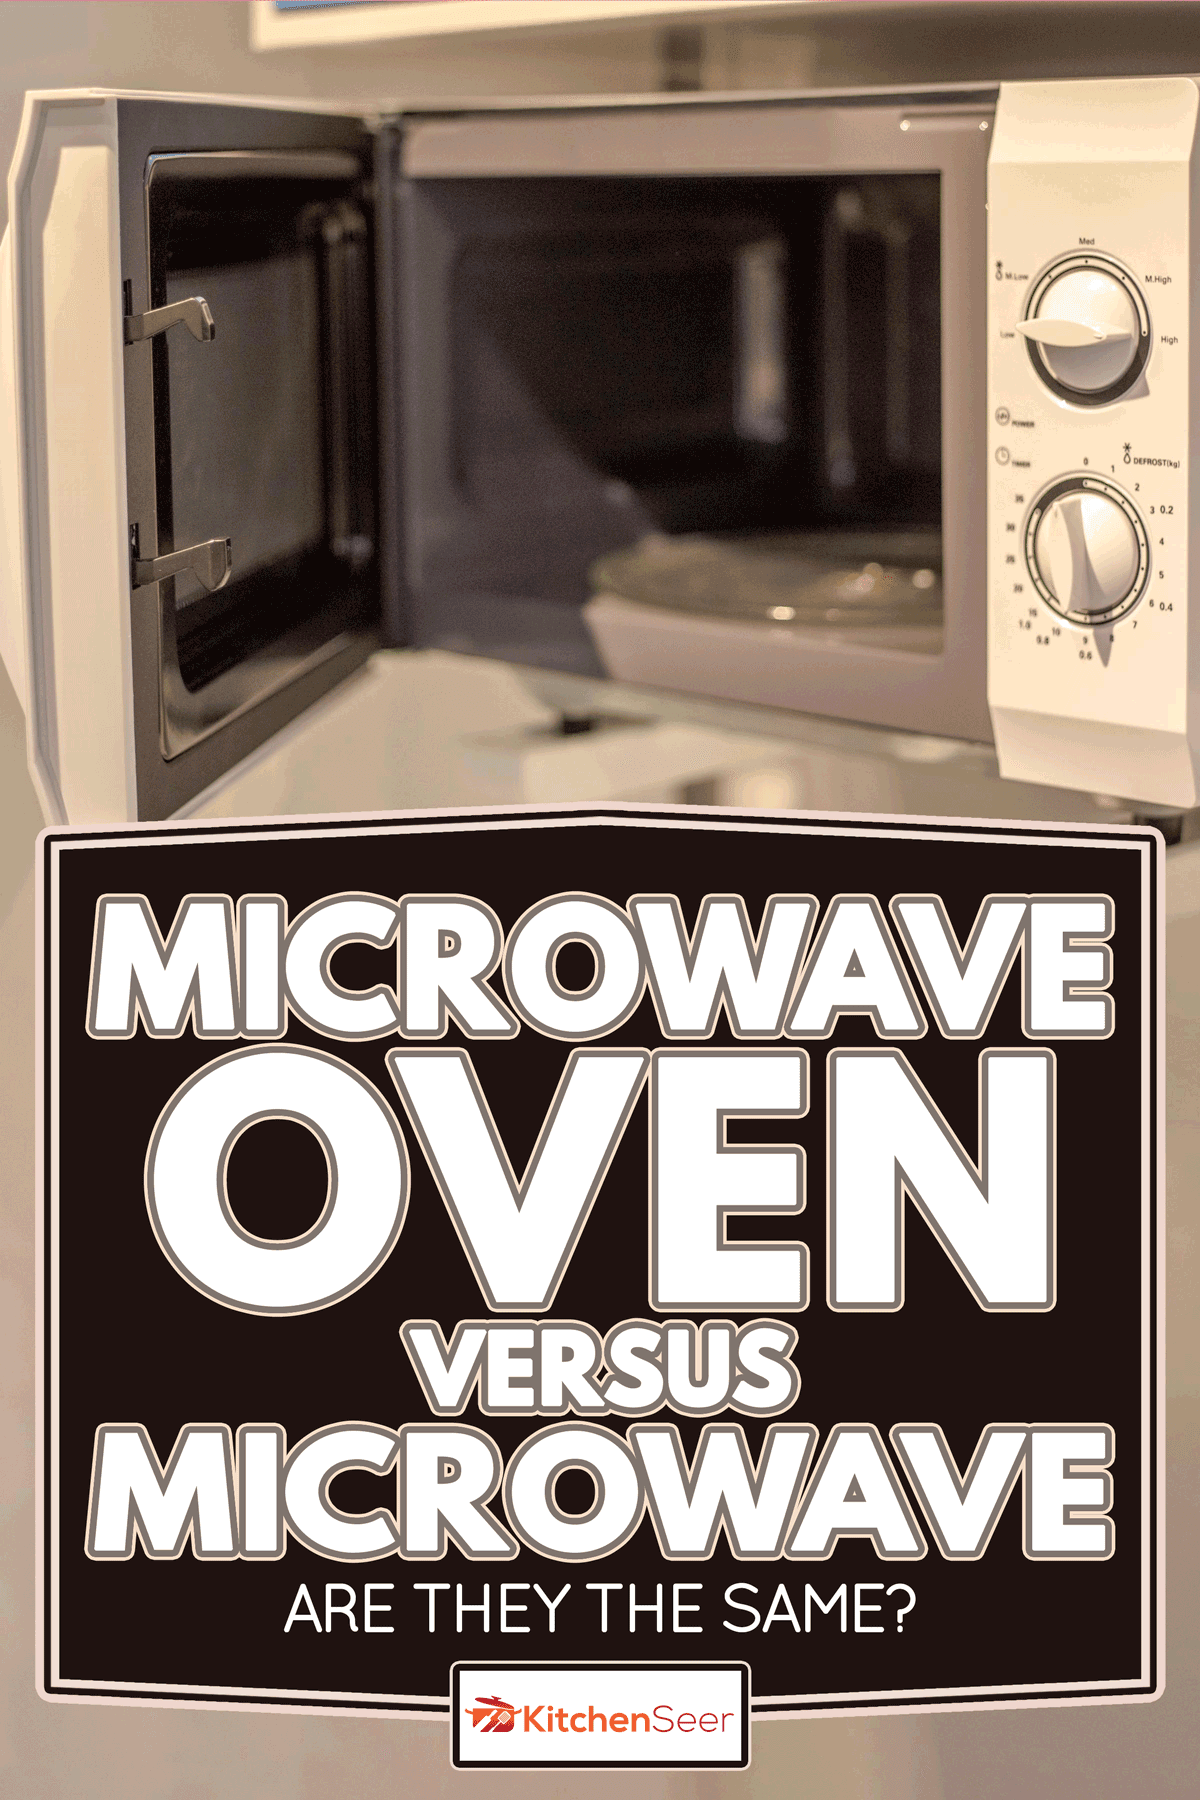 Empty microwave oven with door open, Microwave Oven Vs. Microwave: Are They The Same?